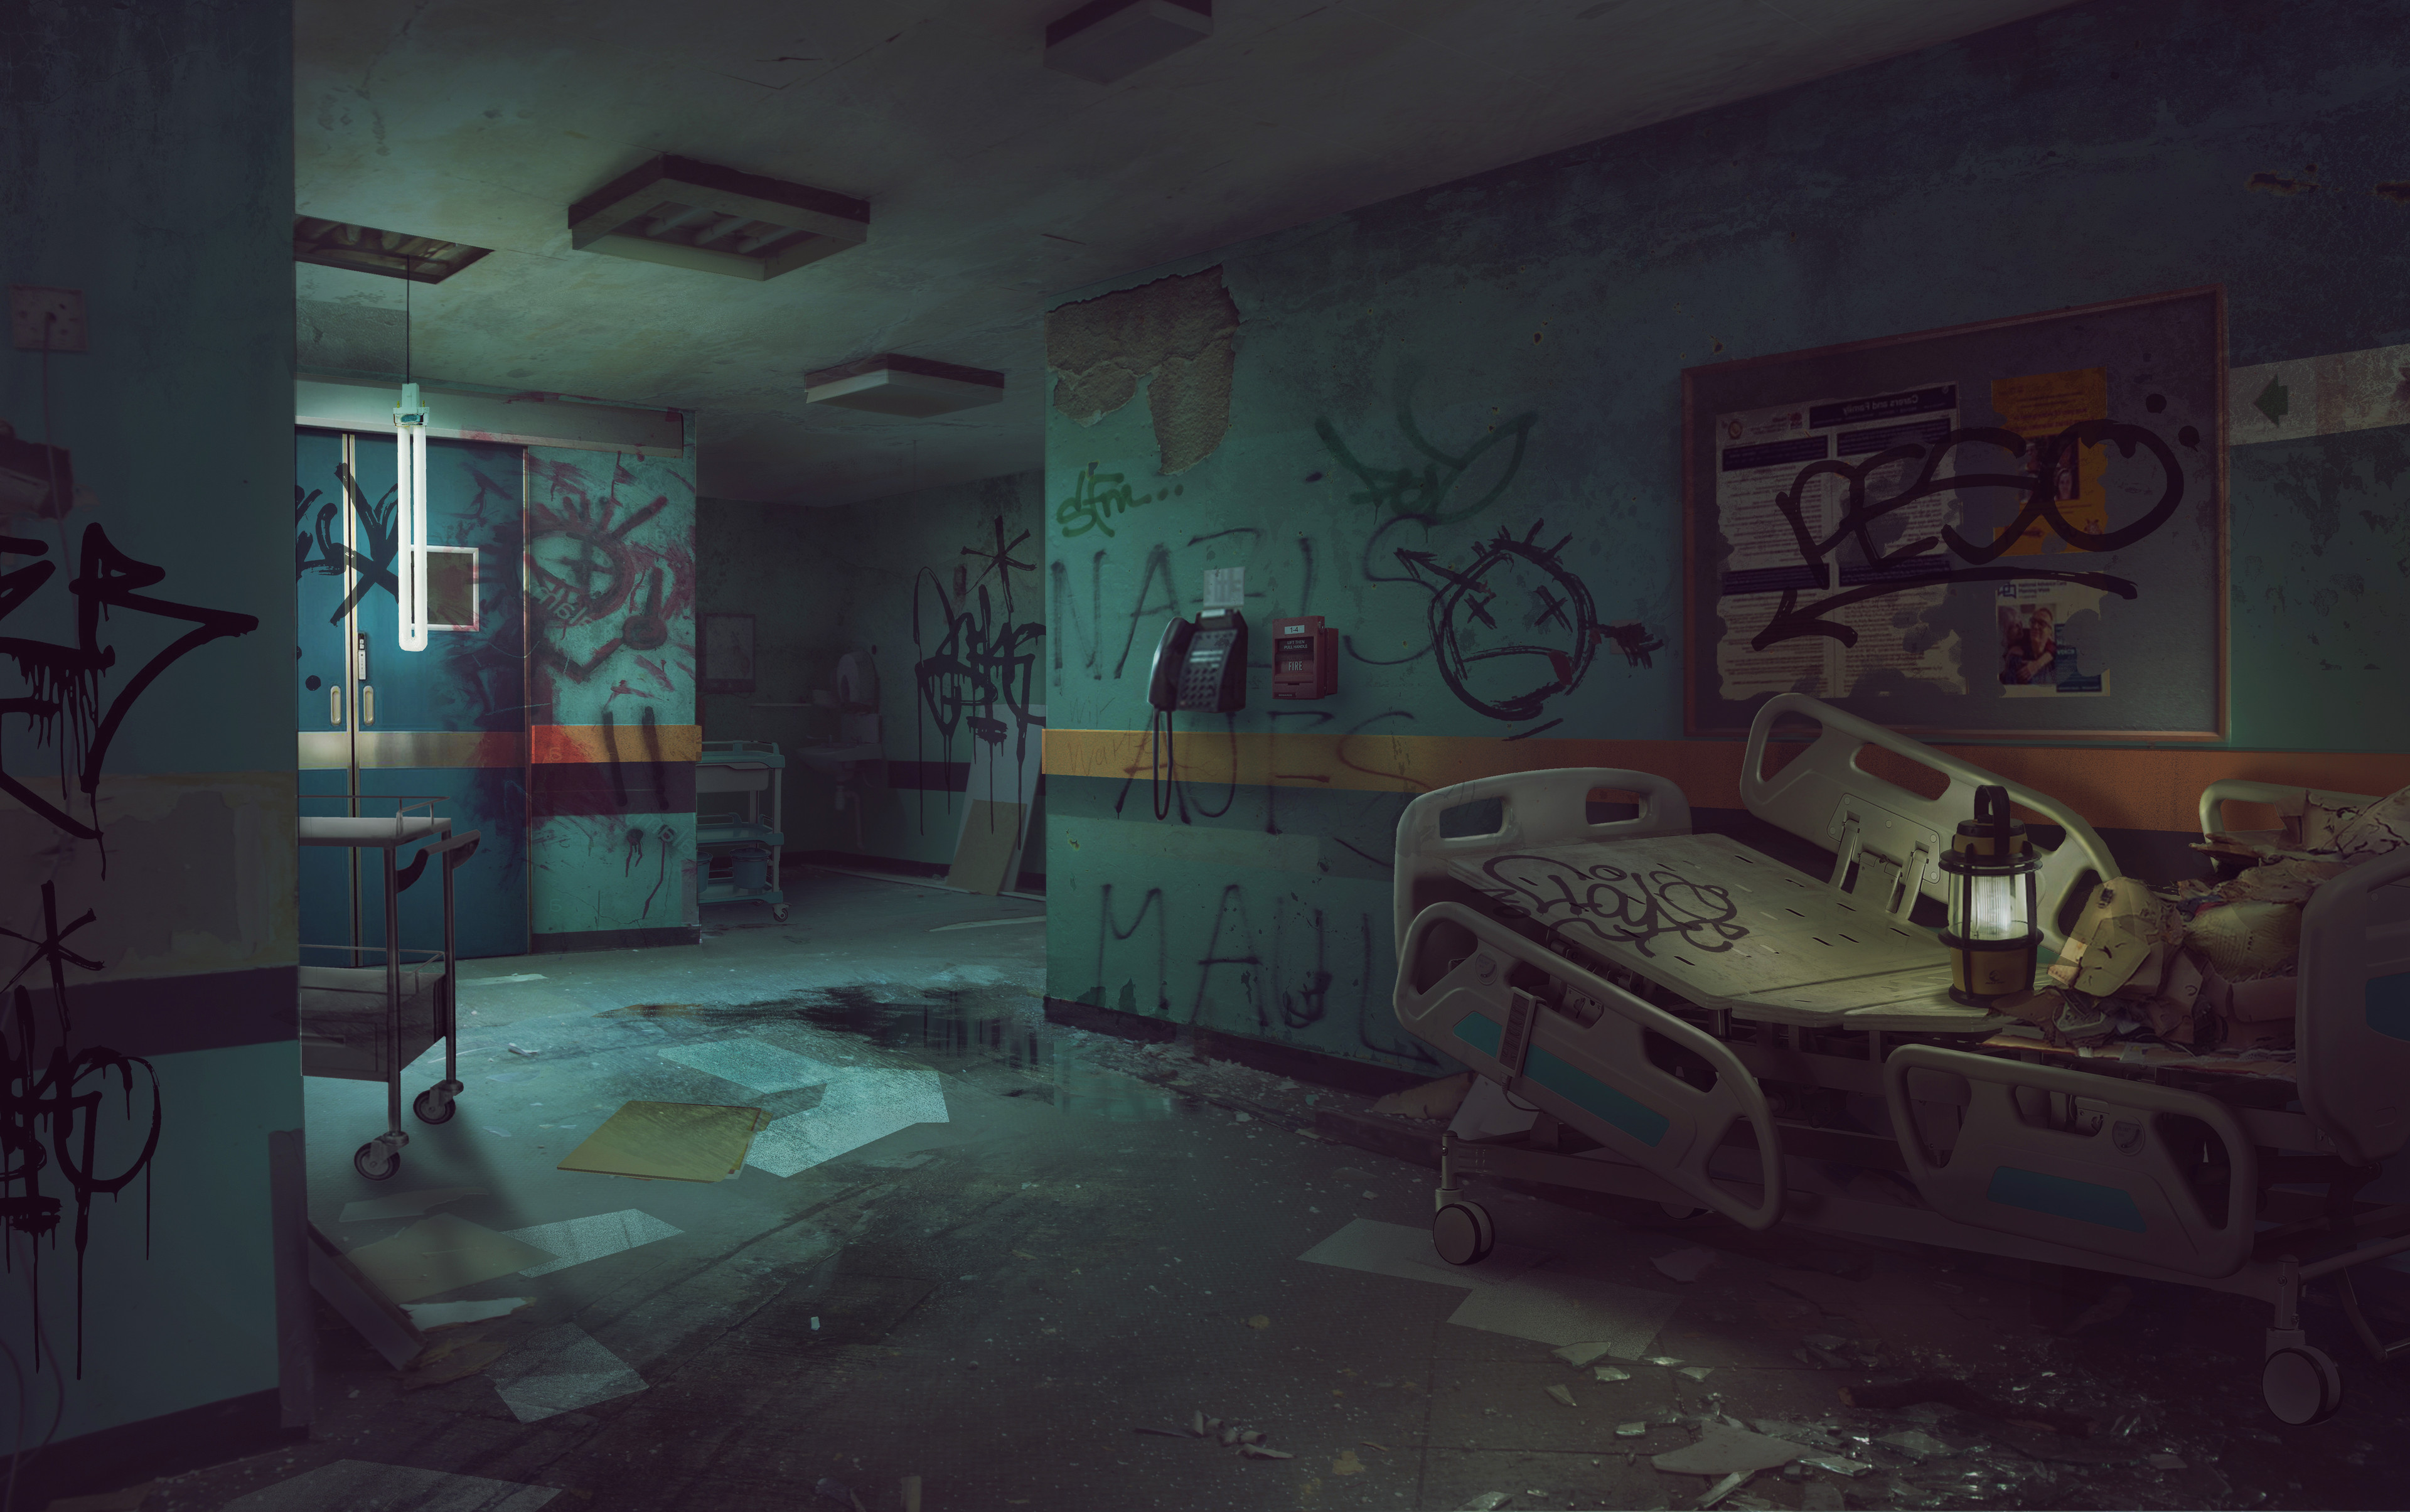 Apocalyptic hospital - more than 1 month after the disaster - Occupied by somebody 